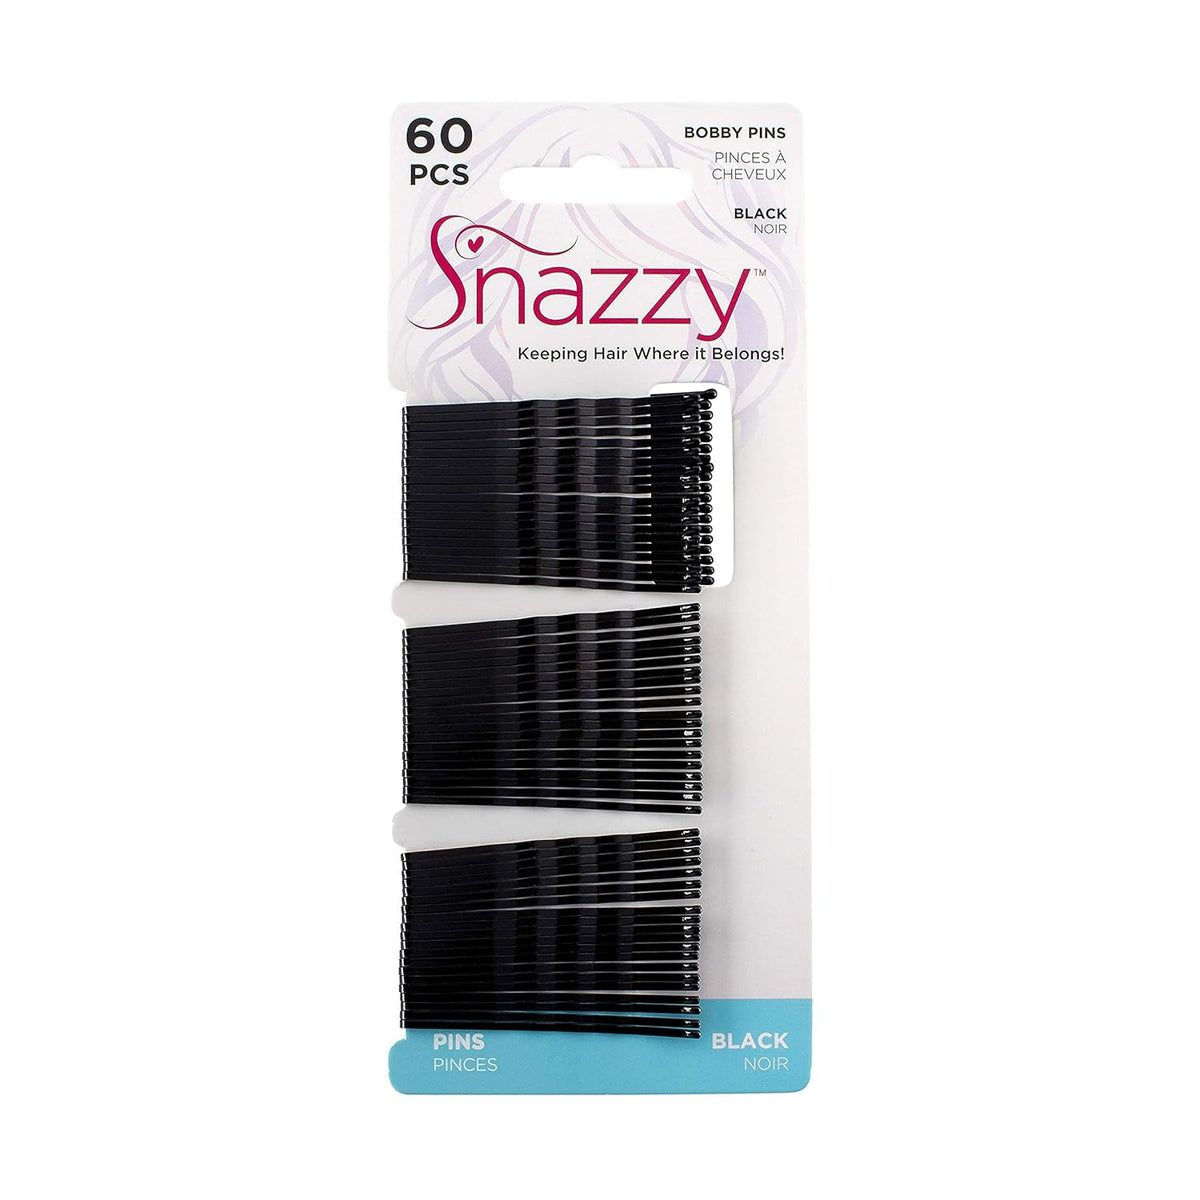 Snazzy Secure Hold Bobby Pins Set of No Slip Hairpins Black 60 Count 1.5mm Bobby Pins